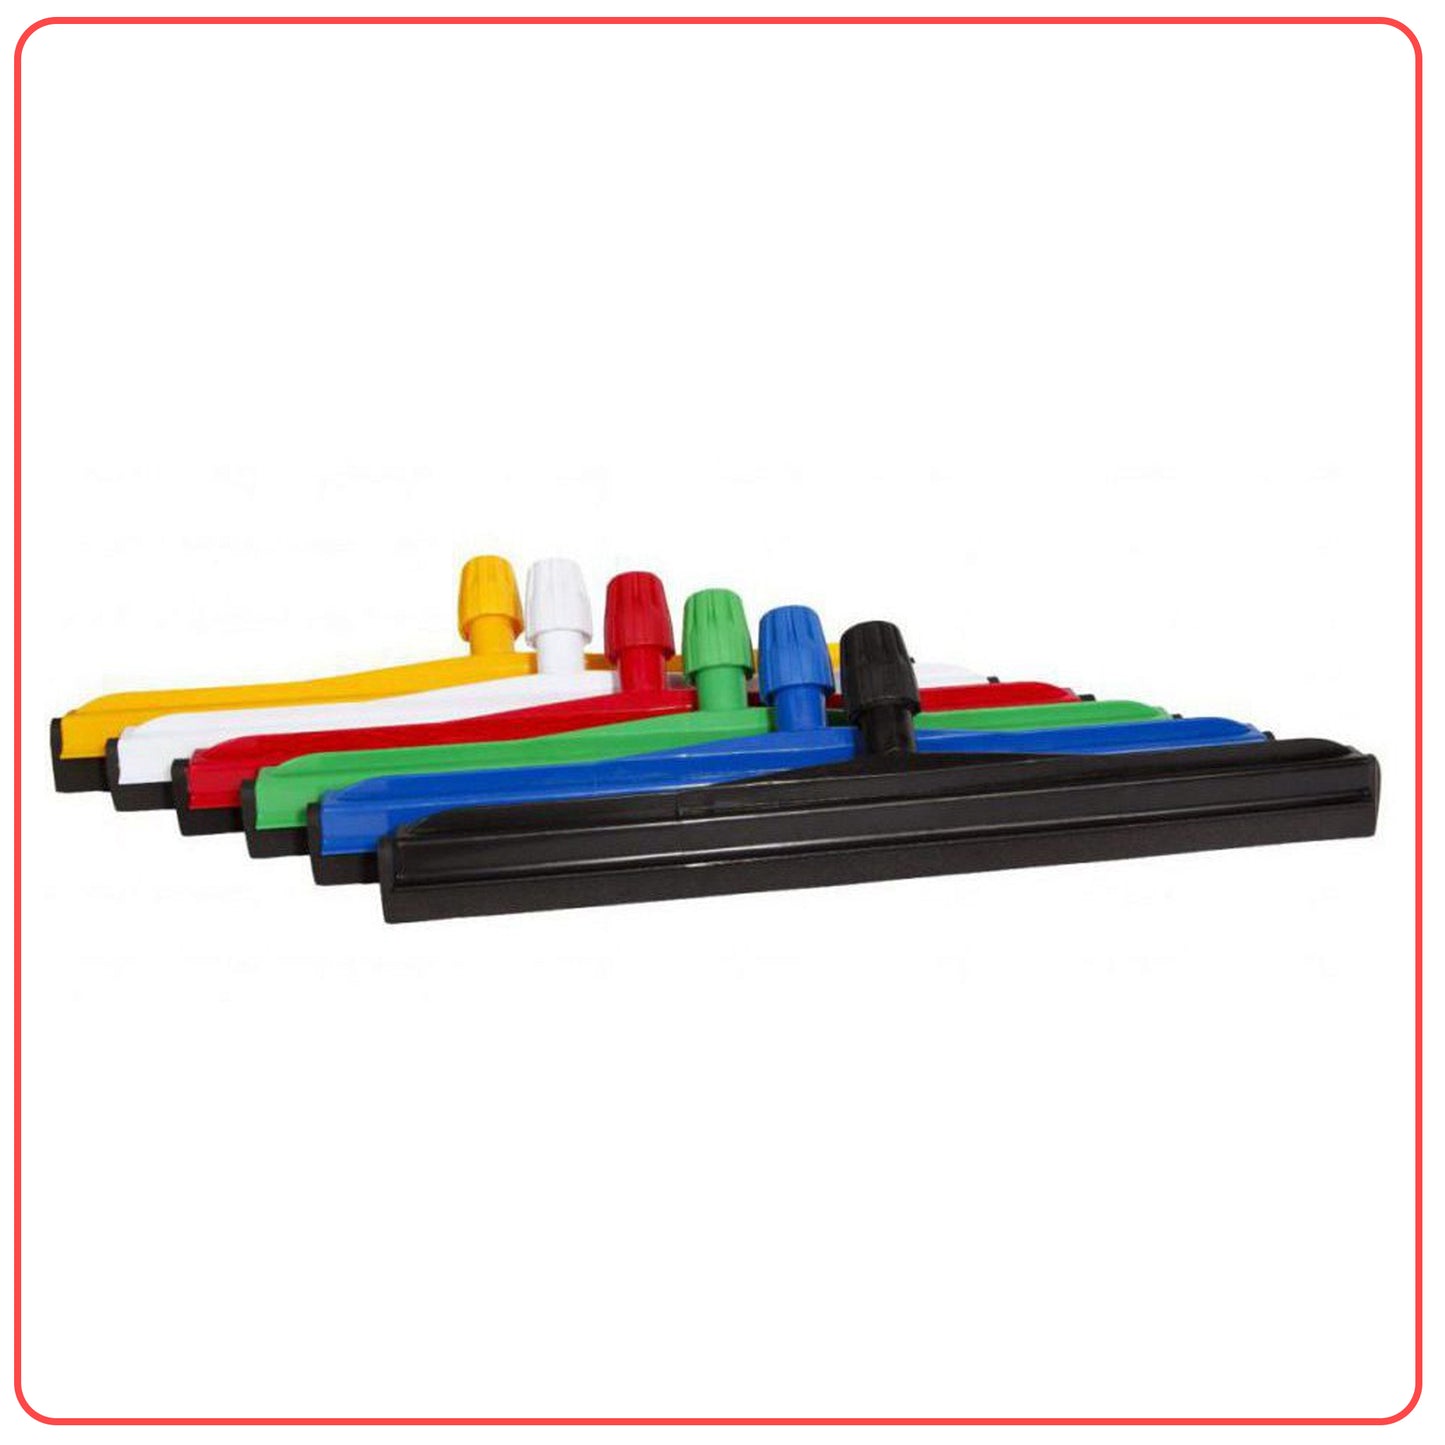 55cm Colour Coded Floor Squeegee (Head Only)